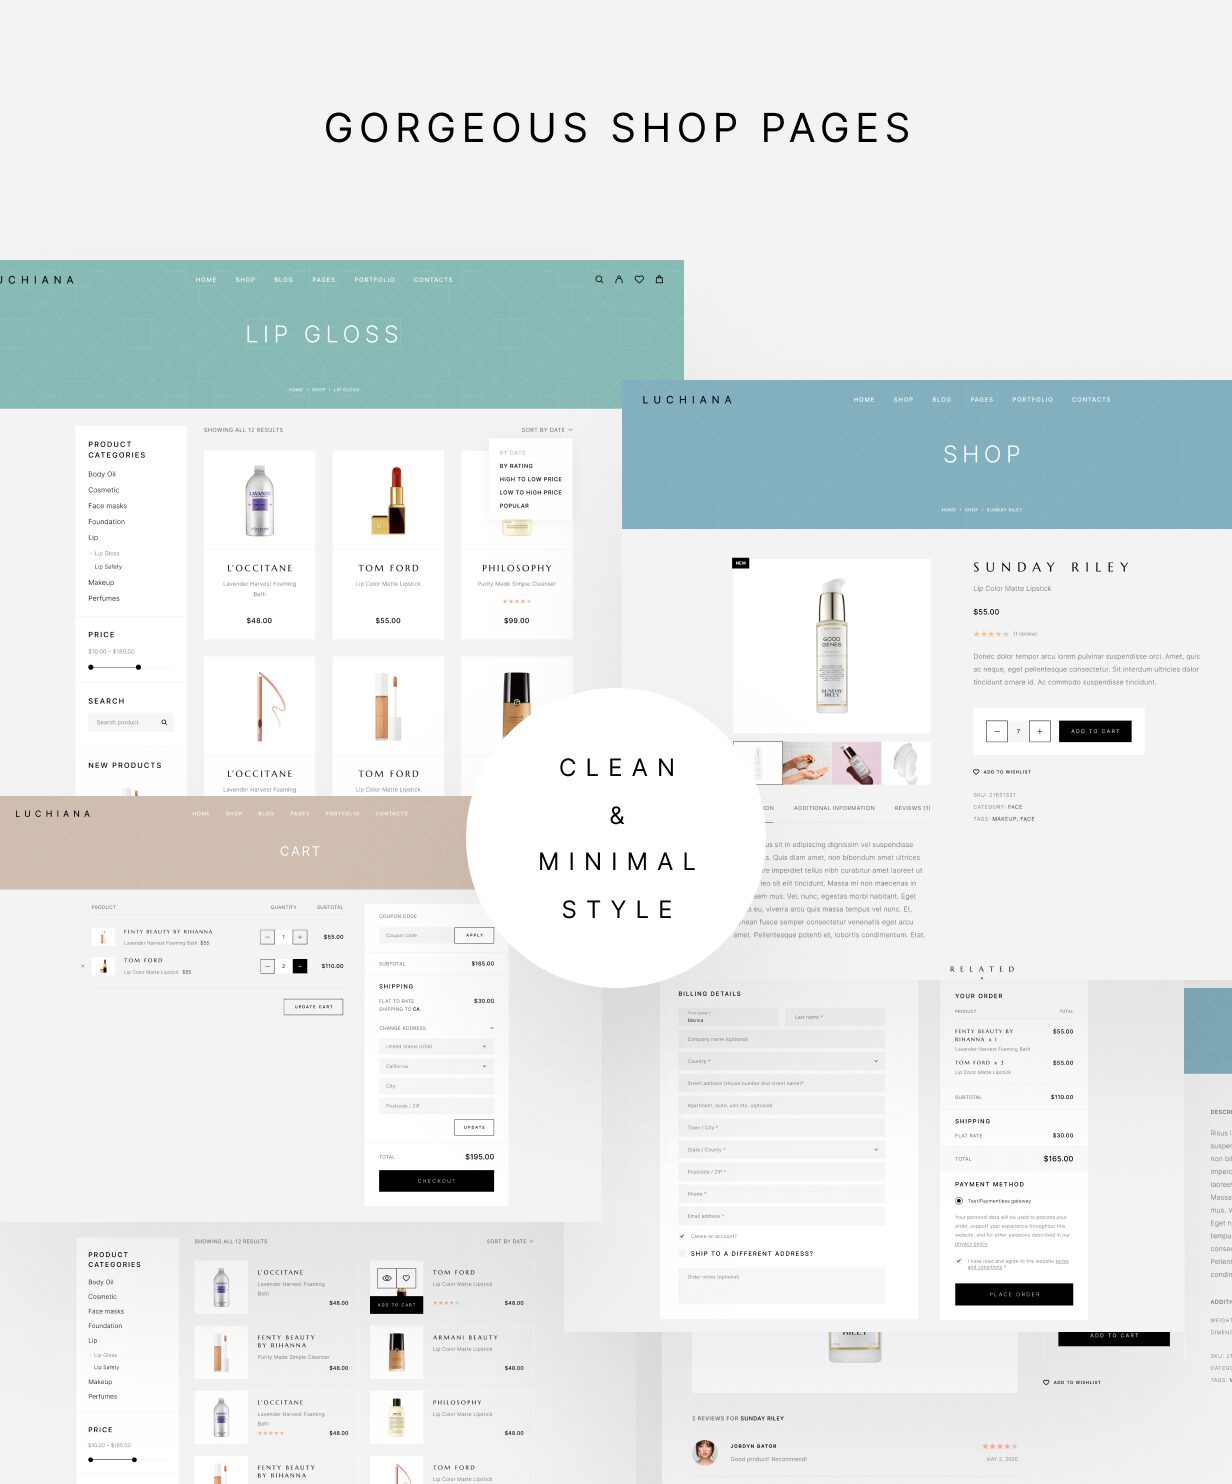 Luchiana - Gorgeous Shop Pages - Clean And Minimal Style